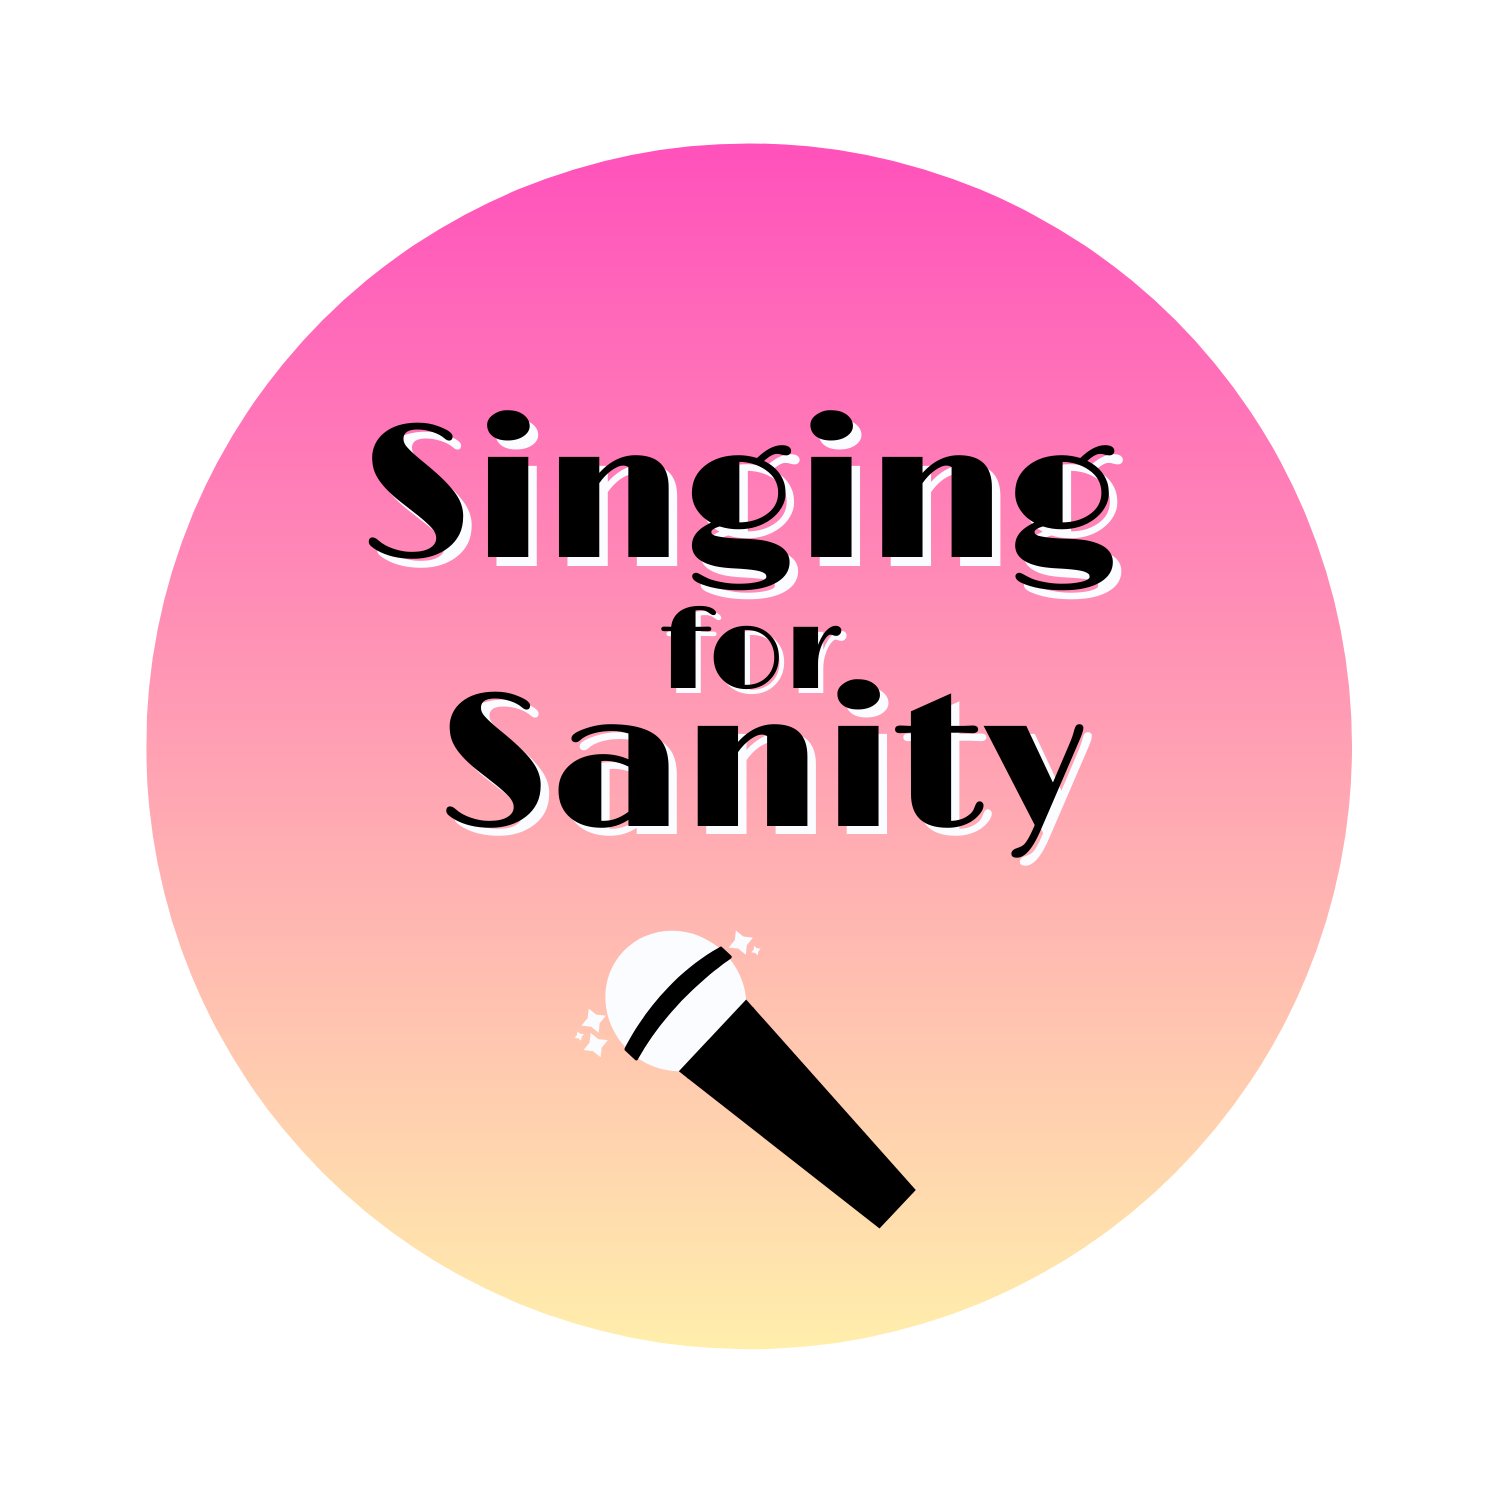 Singing for Sanity